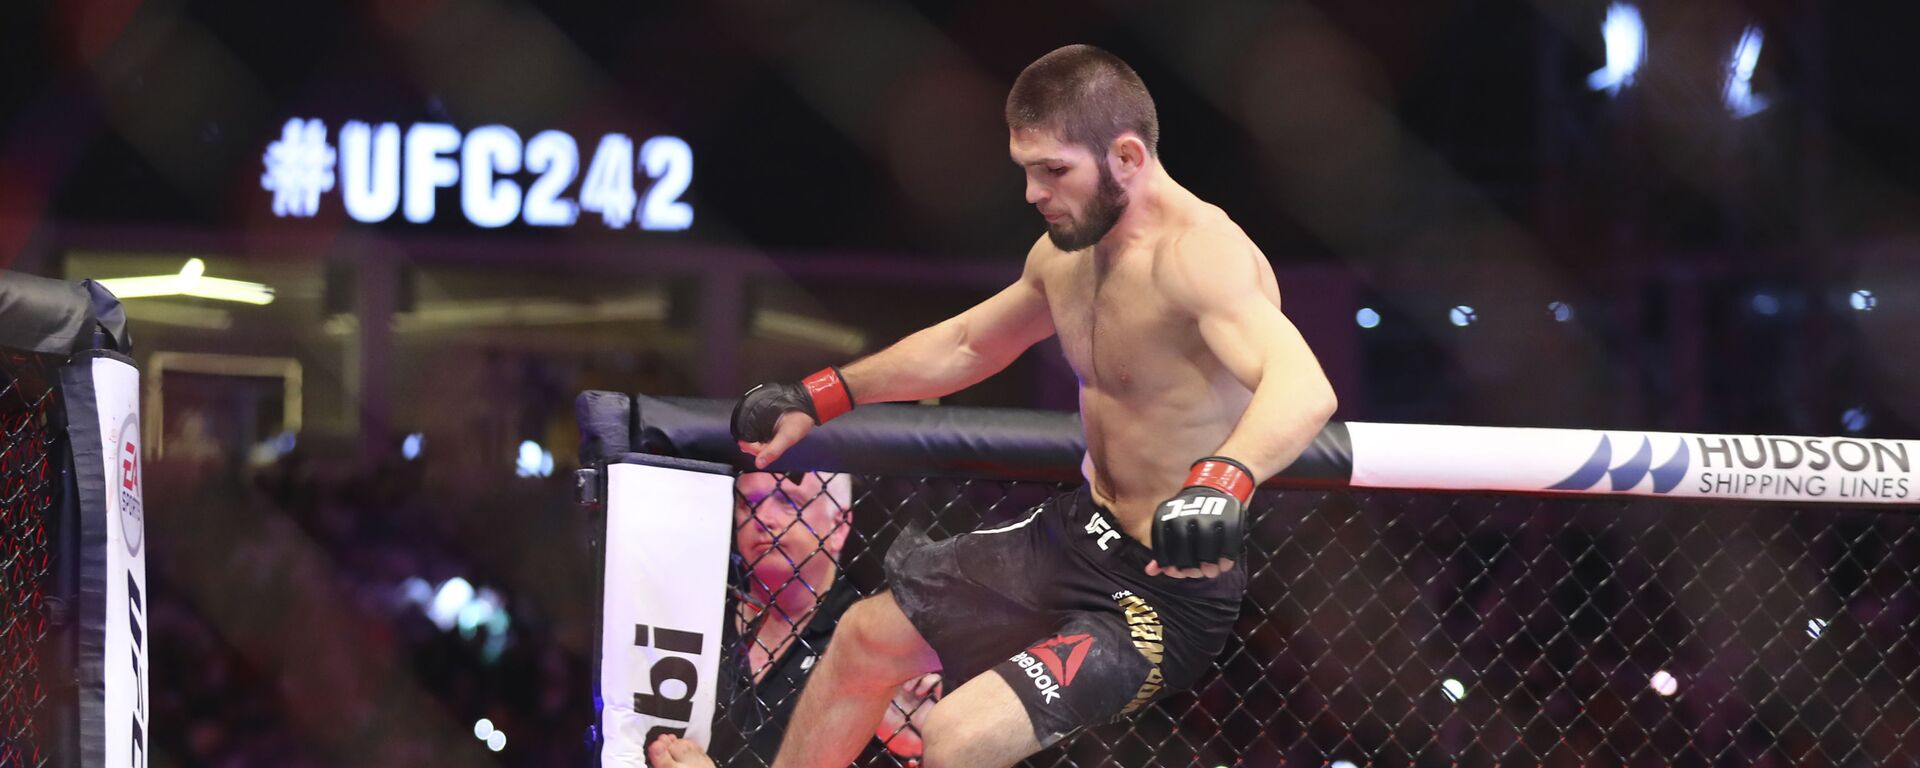 Russian UFC fighter Khabib Nurmagomedov, jumps during Lightweight title mixed martial arts bout at UFC 242, fight against UFC fighter Dustin Poirier, of Lafayette, La., in Yas Mall in Abu Dhabi, United Arab Emirates, Saturday , Sept.7 2019.  - اسپوتنیک افغانستان  , 1920, 04.06.2021